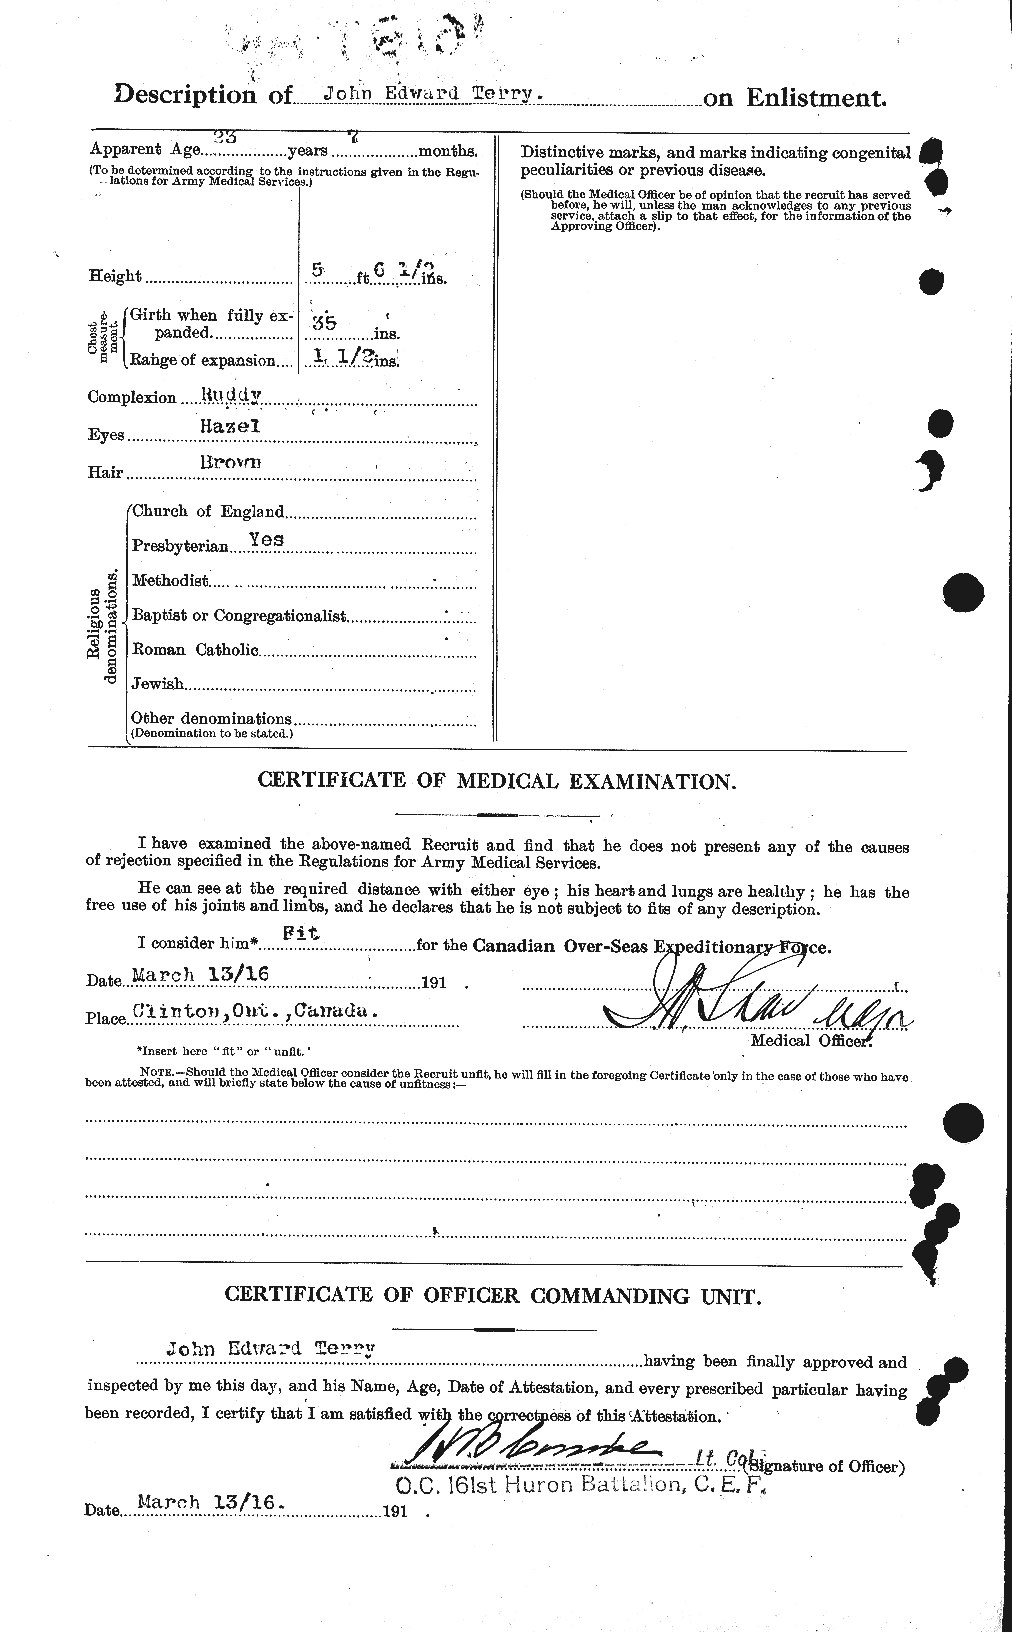 Personnel Records of the First World War - CEF 629295b